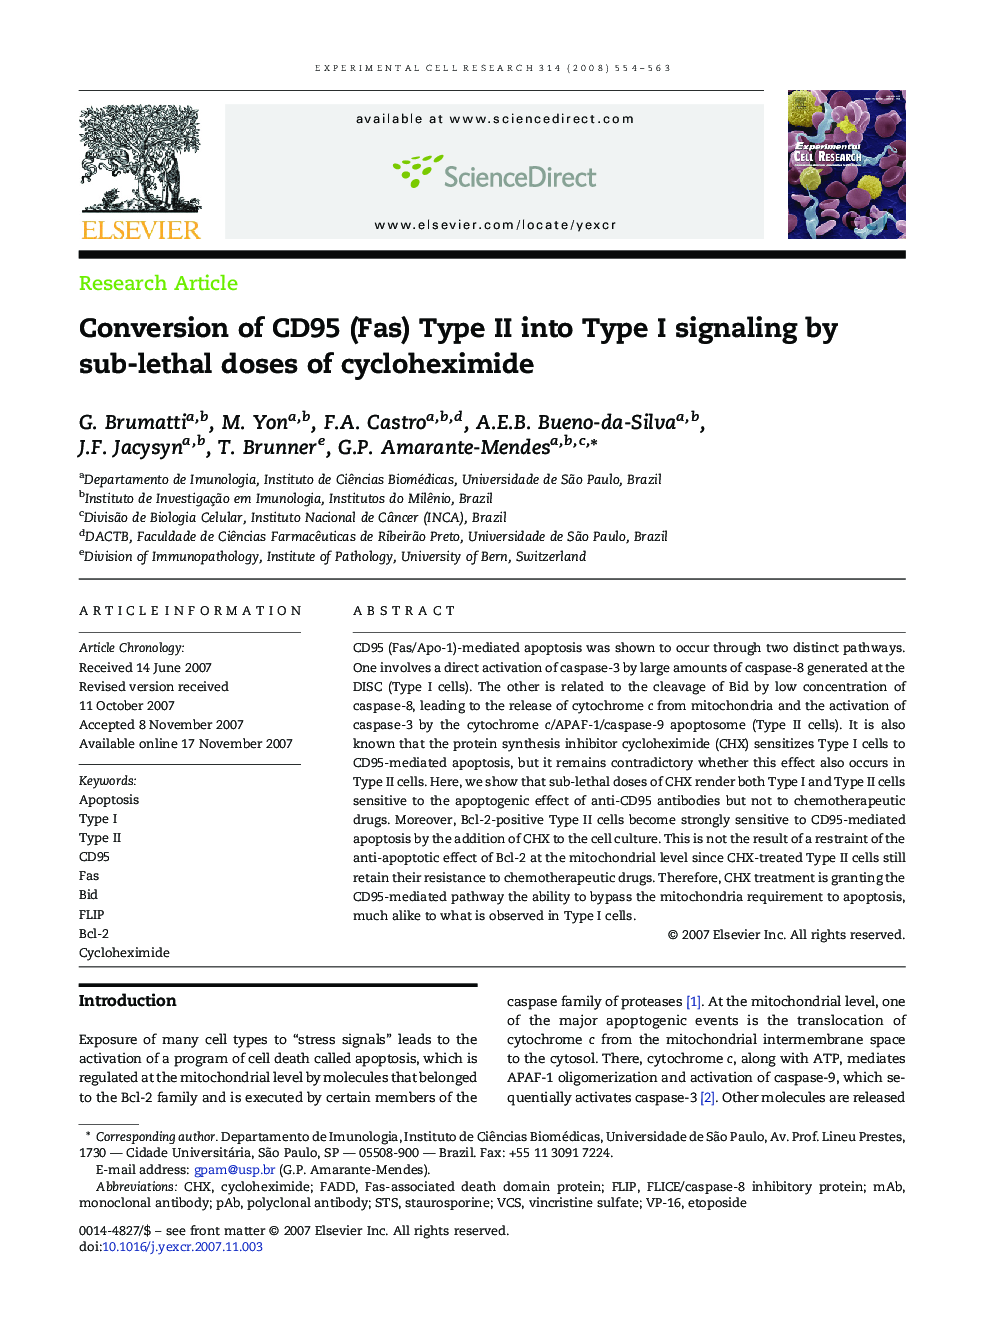 Conversion of CD95 (Fas) Type II into Type I signaling by sub-lethal doses of cycloheximide